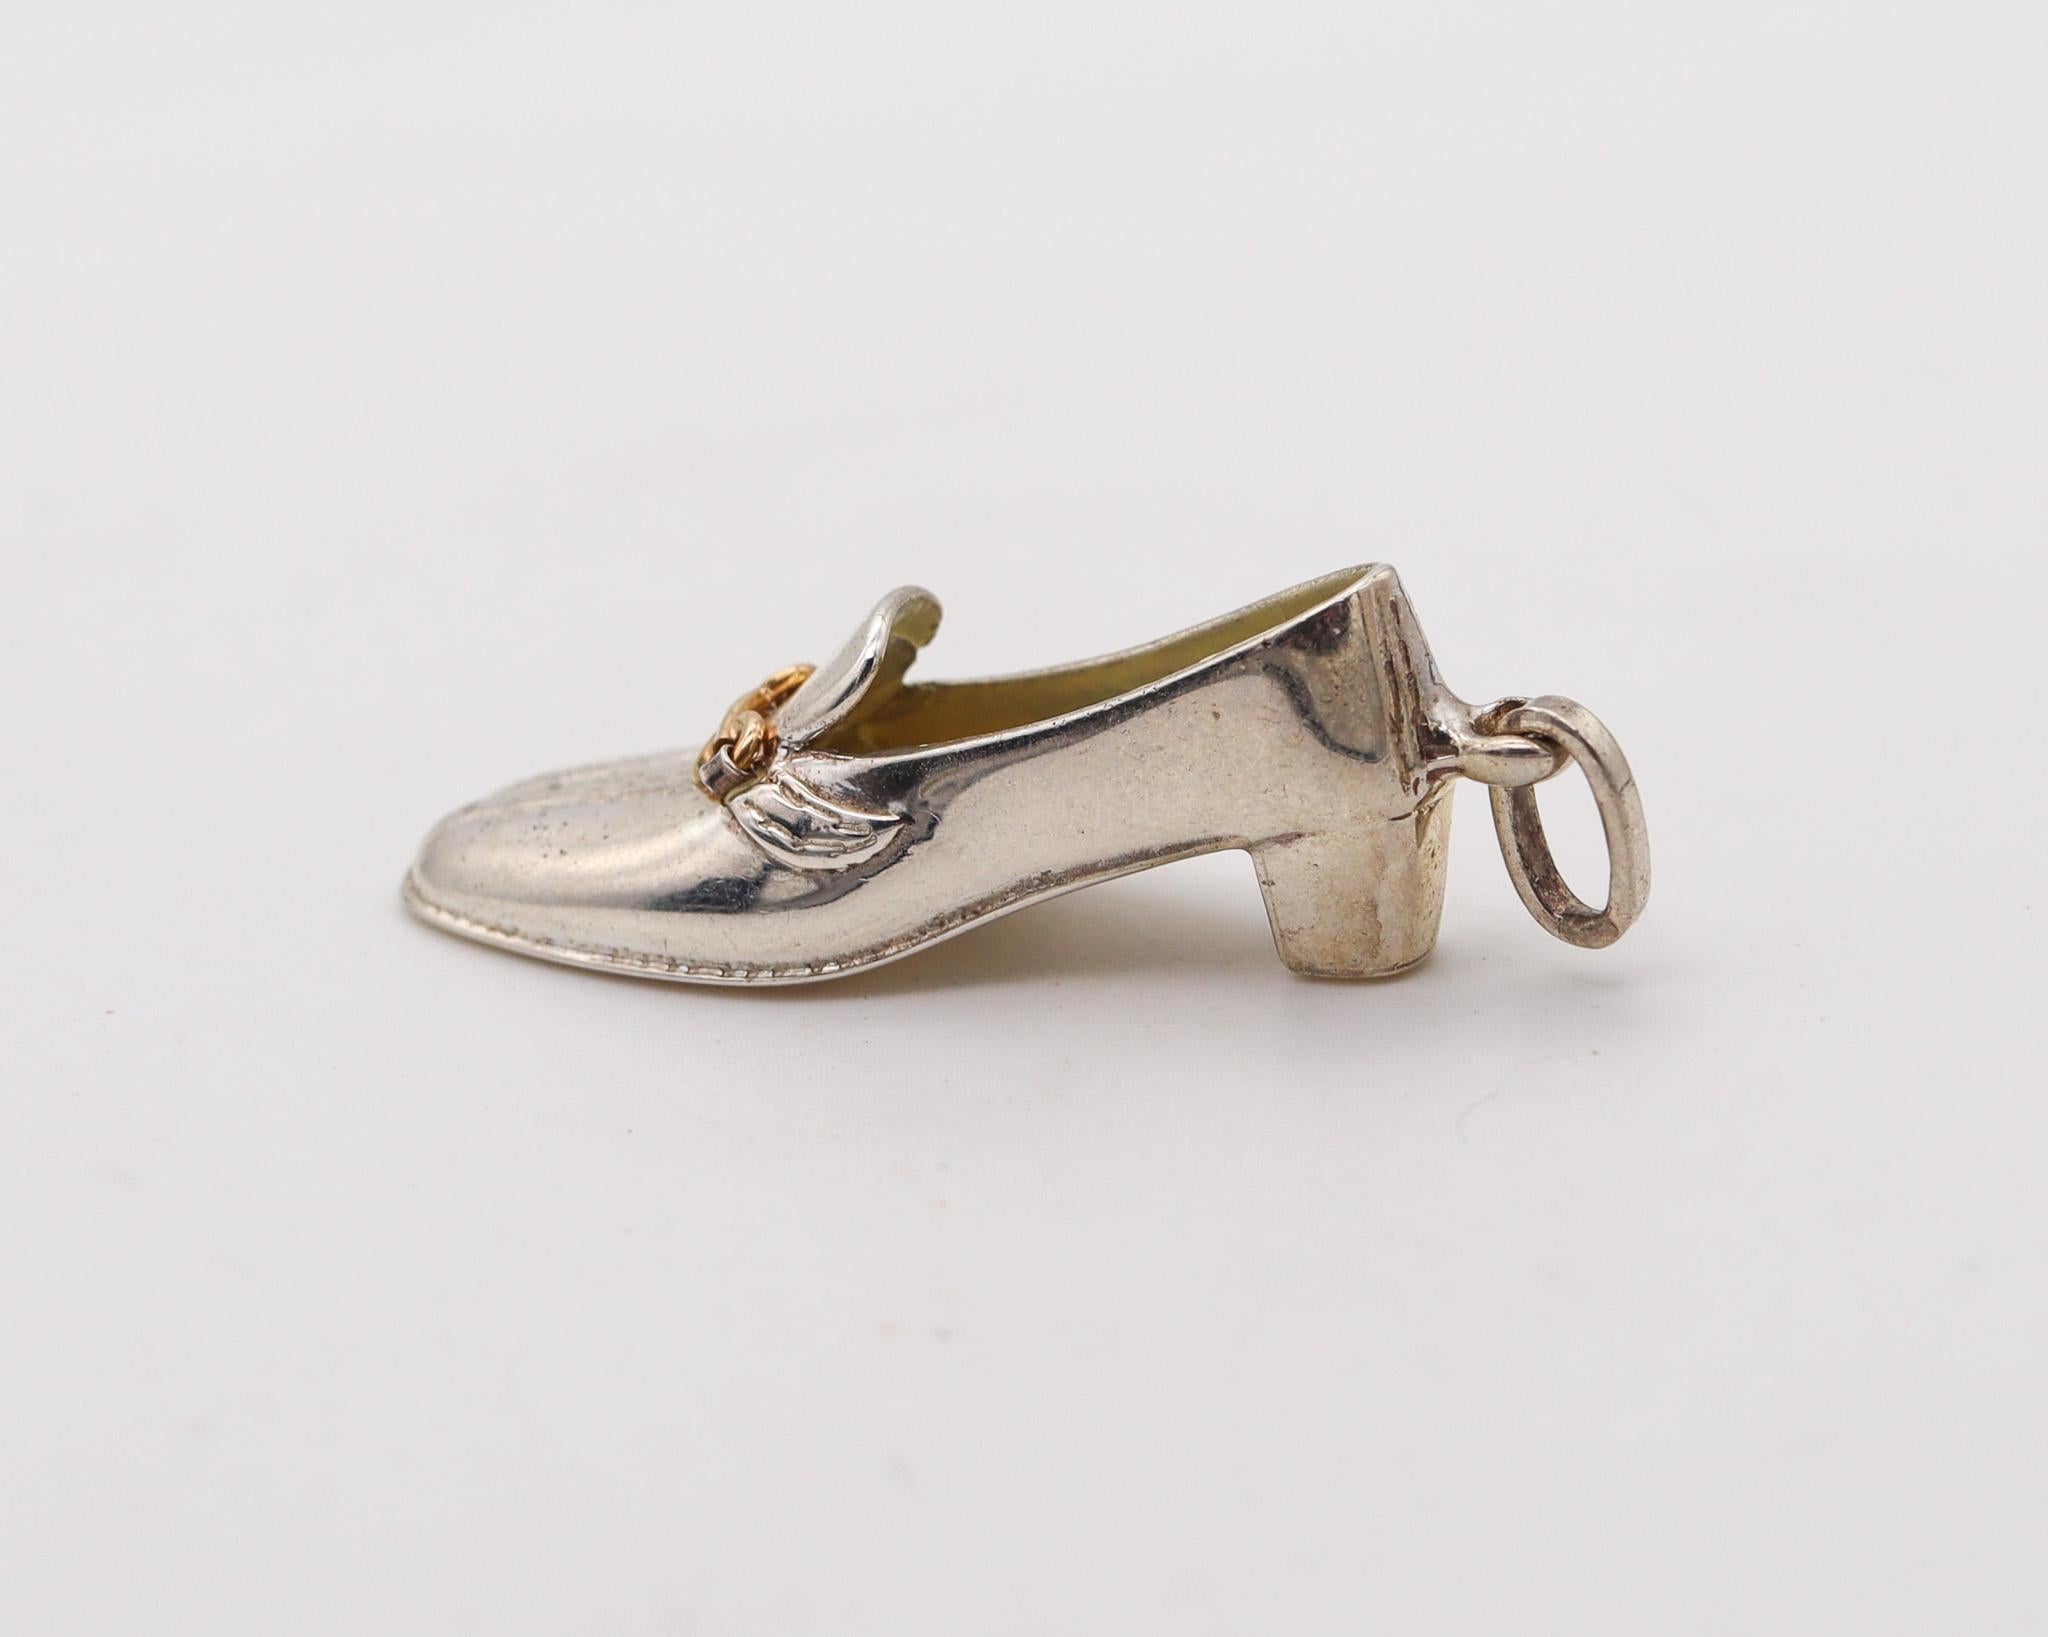 Pendant charm designed by Gucci.

Beautiful pendant-charm, created in Firenze Italy by the fashion house of Gucci, back in the 1980's. This pendant has been made as a miniature in the shape of the iconic Shoe With Heels in solid .925/.999 sterling